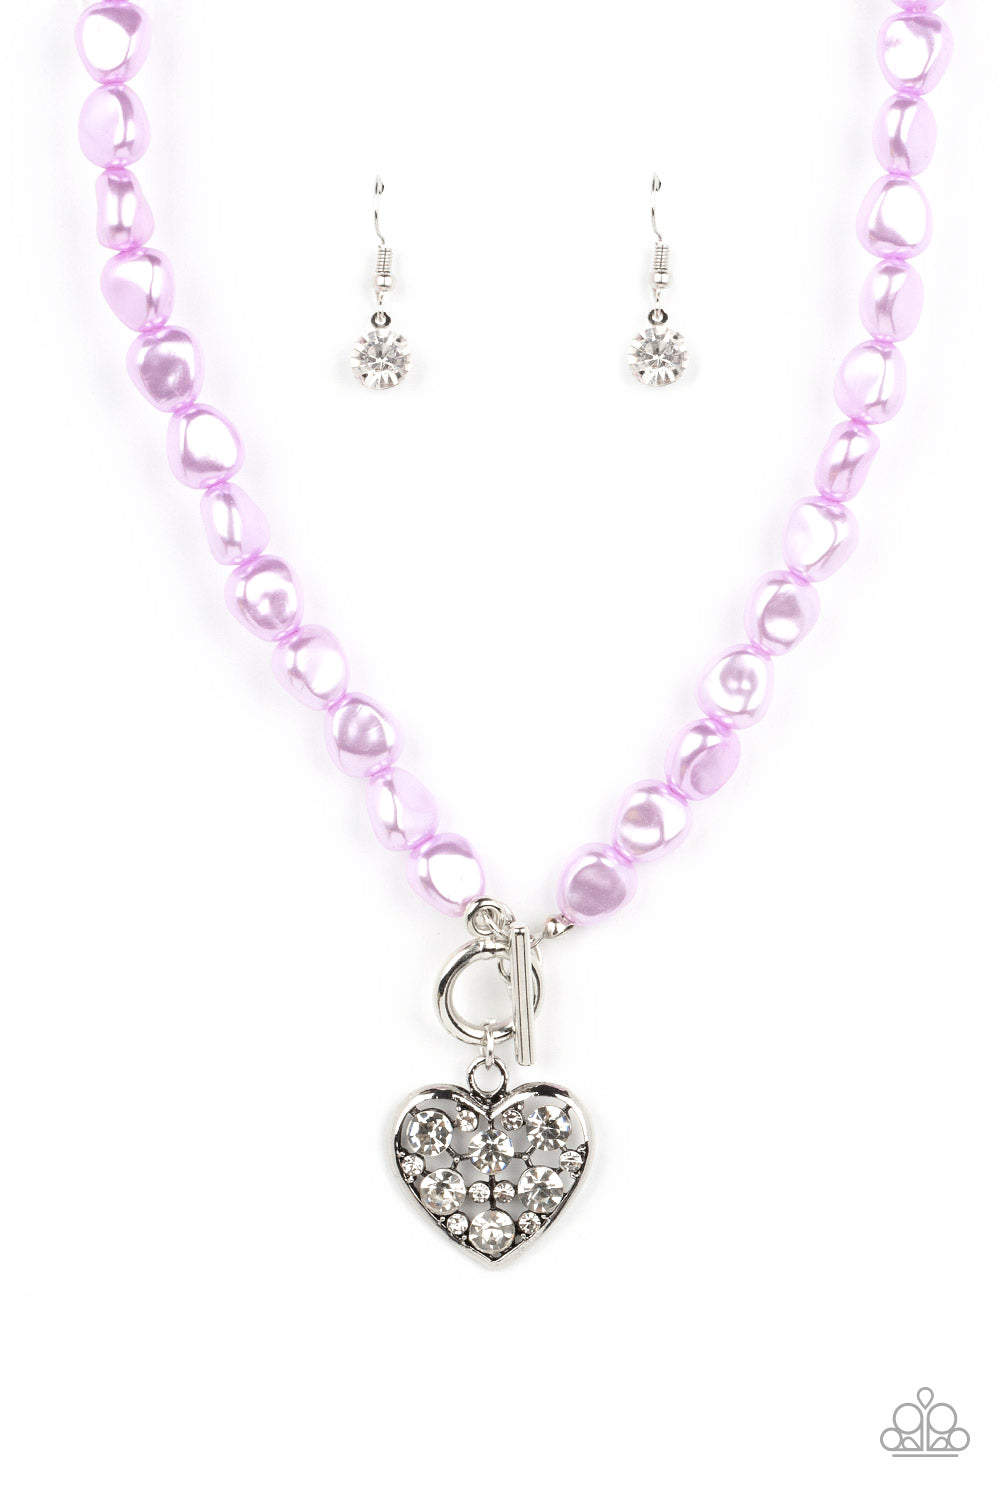 Color Me Smitten Paparazzi Accessories Necklace with Earrings Purple